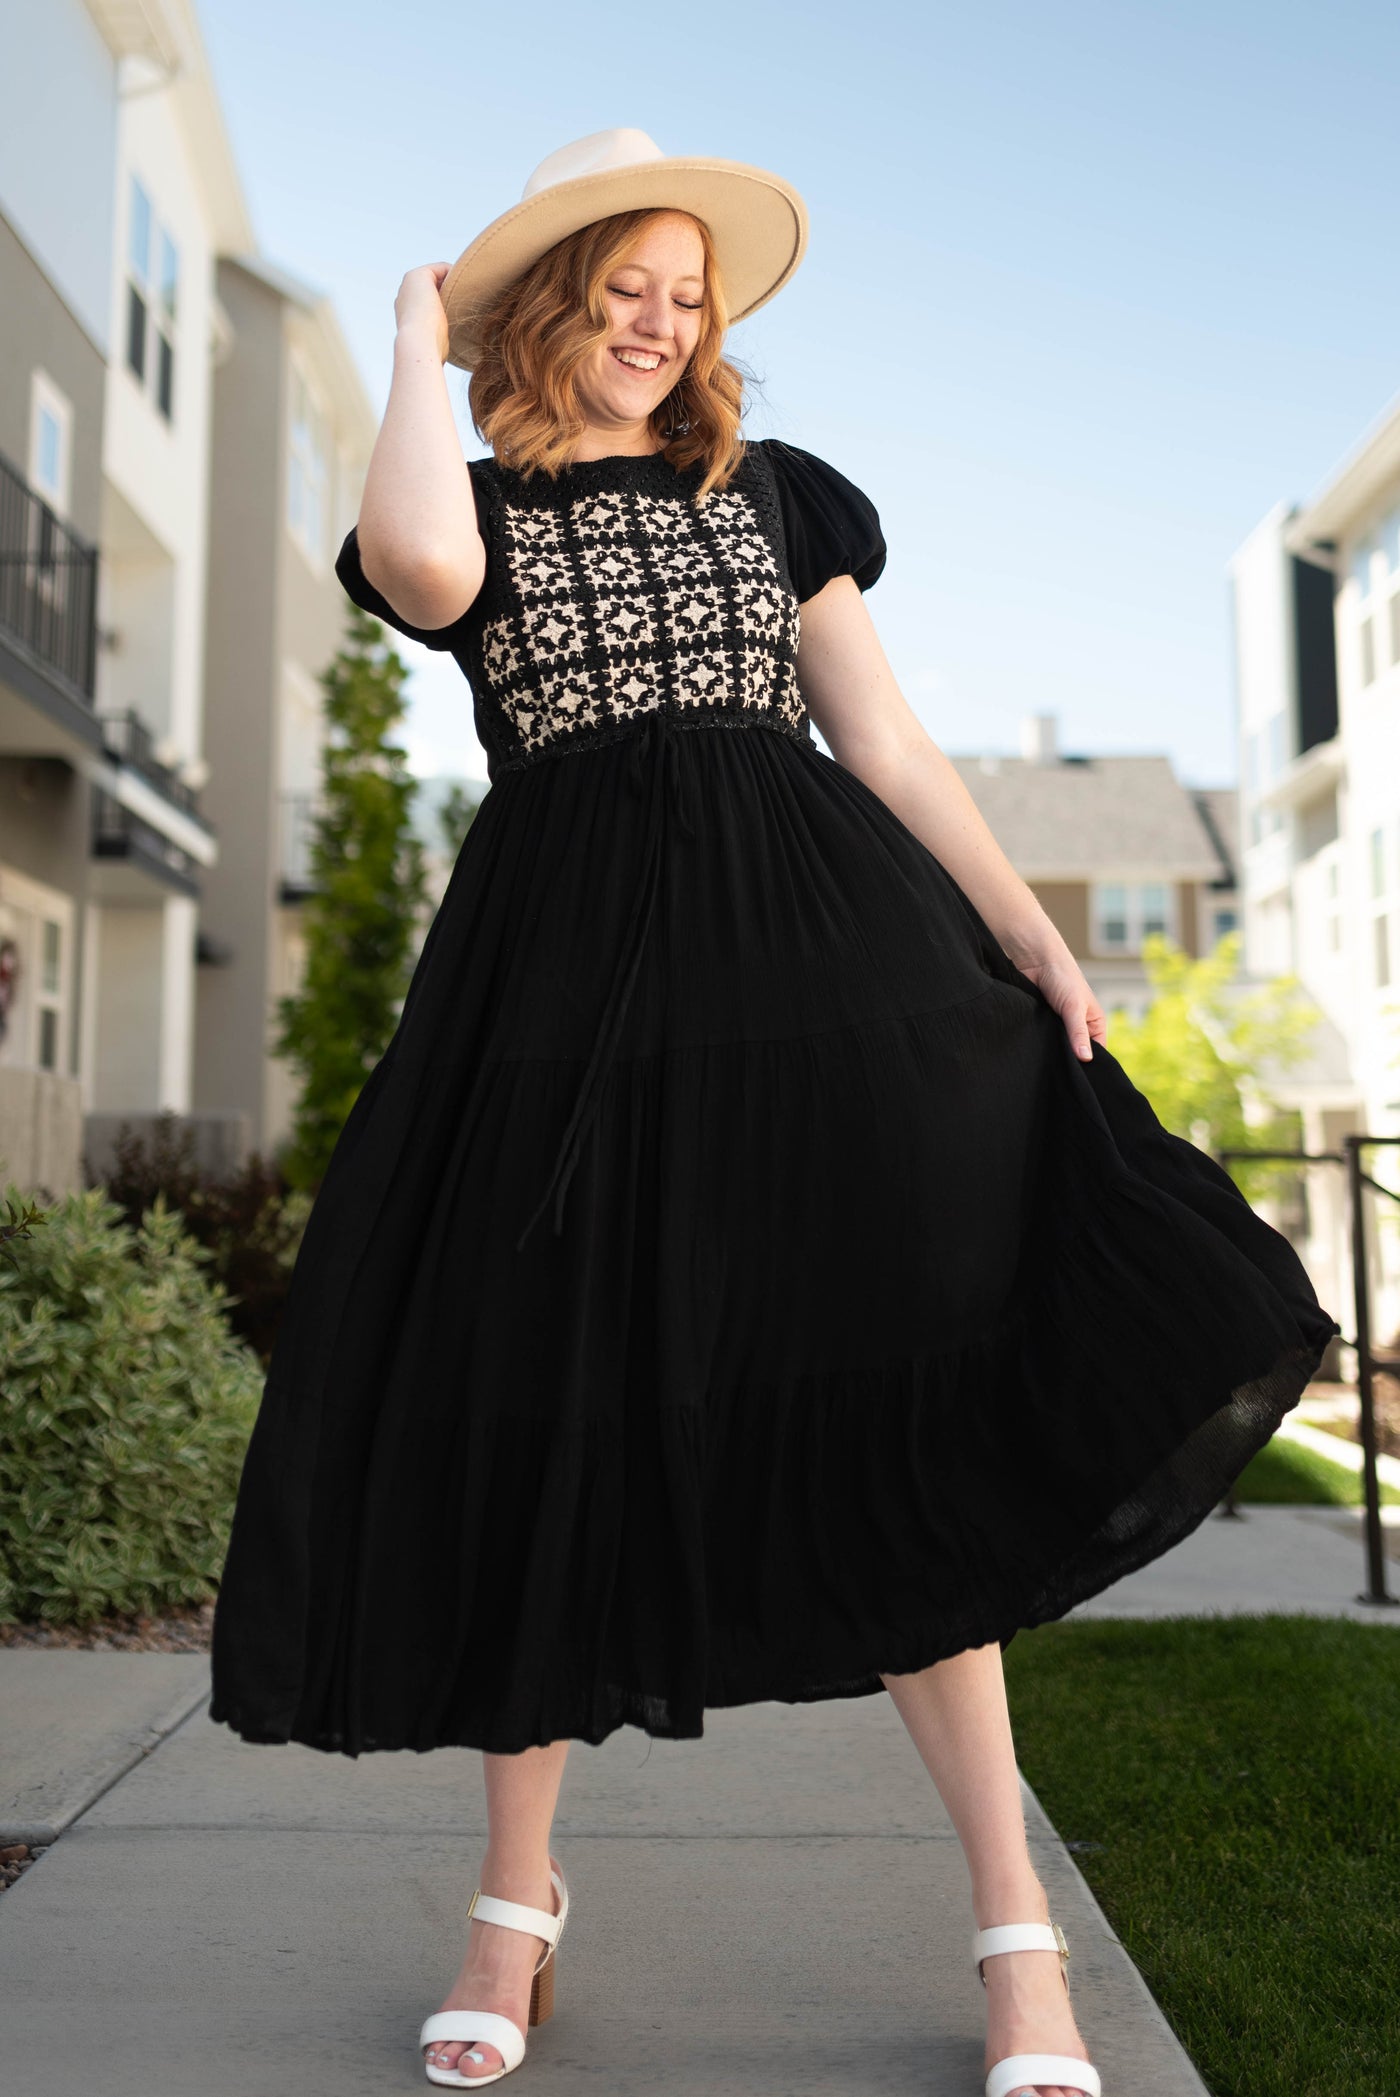 Short sleeve black dress with pockets and crocheted top